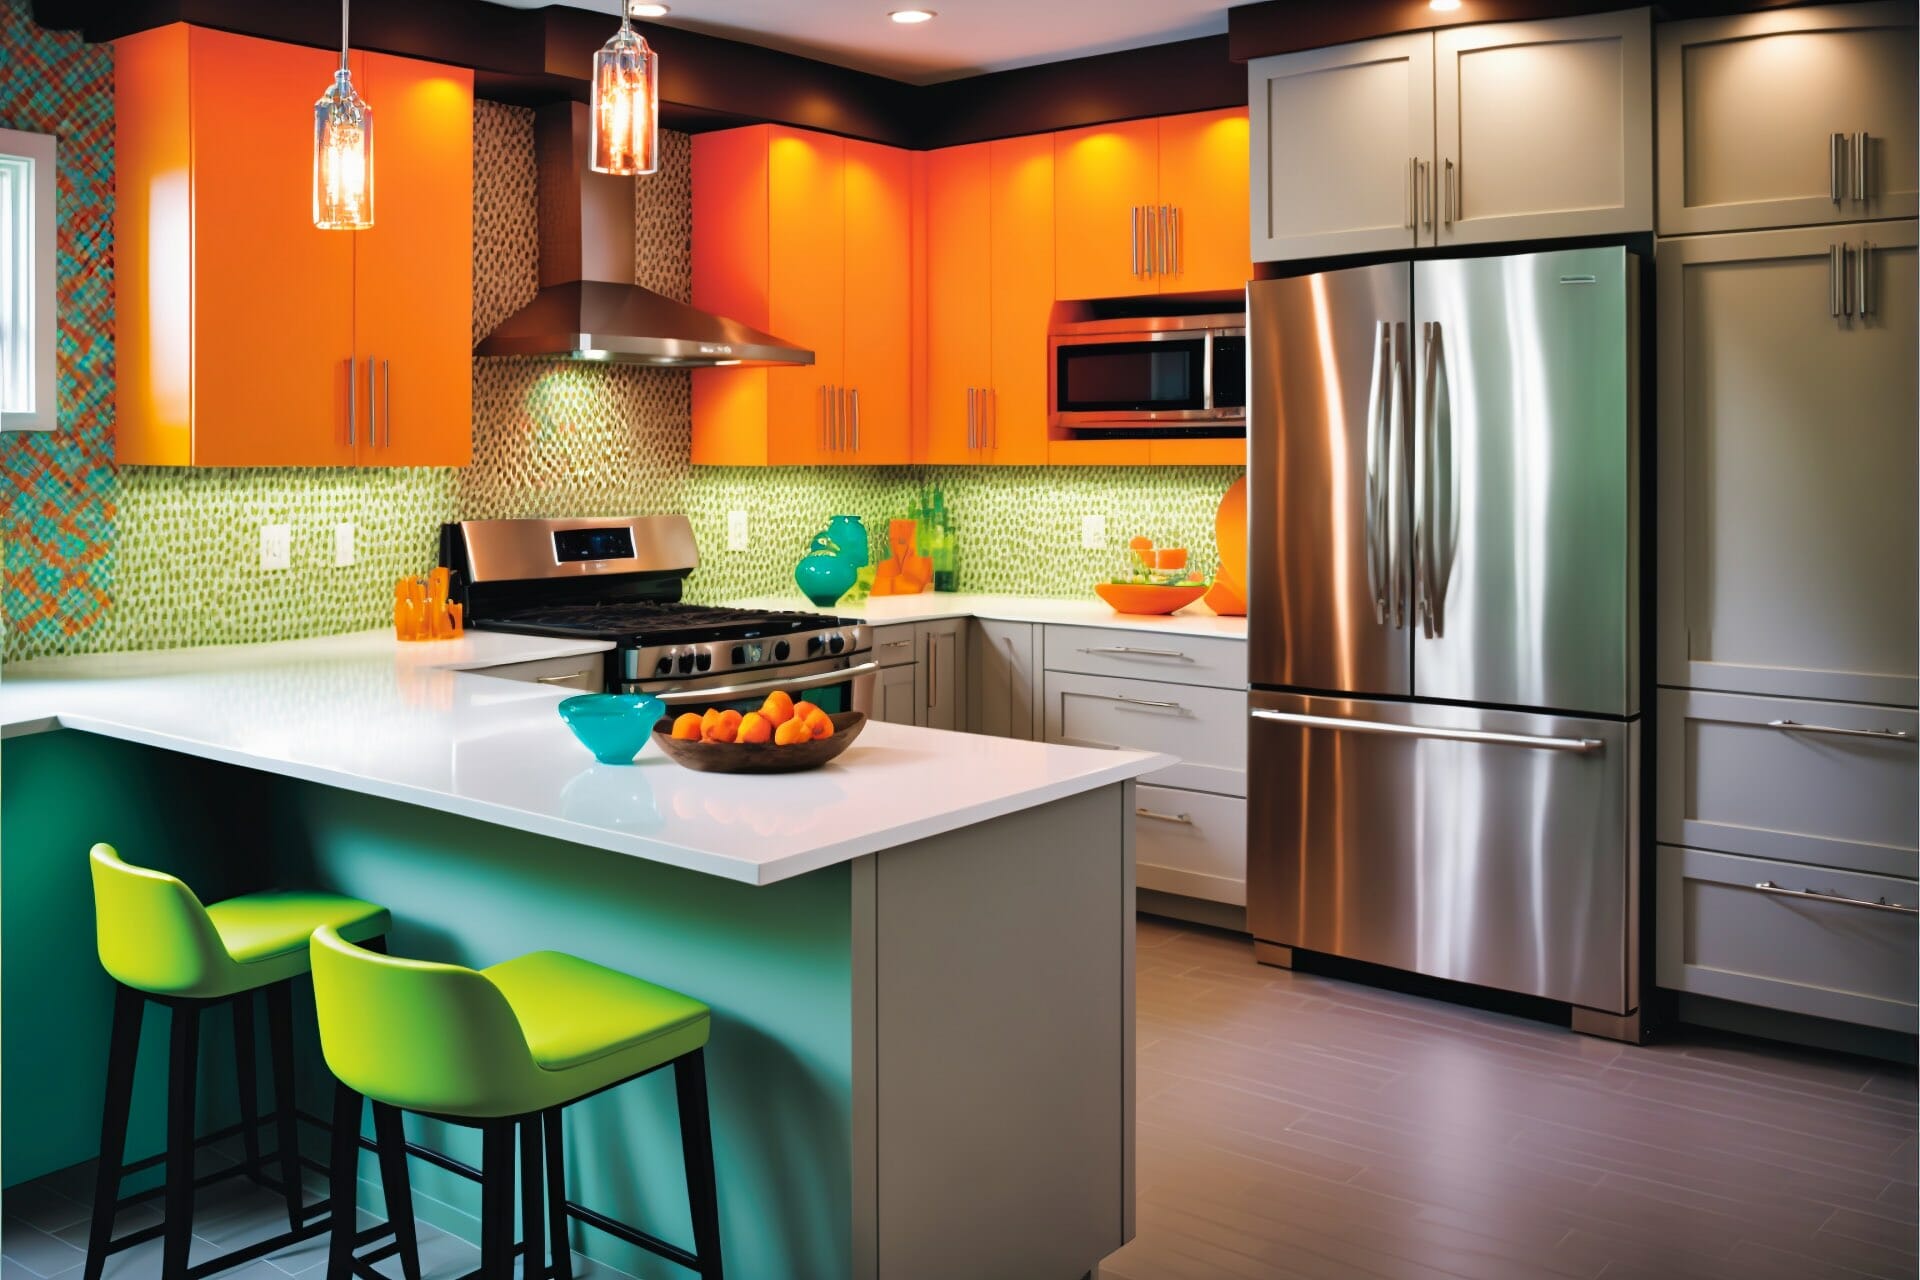 This Modern Kitchen Features Bright And Colorful Cabinetry, White Countertops, And Stainless Steel Appliances. The Orange Backsplash And Statement Lighting Add A Unique And Fun Element, While The Green Accents Complete The Look.